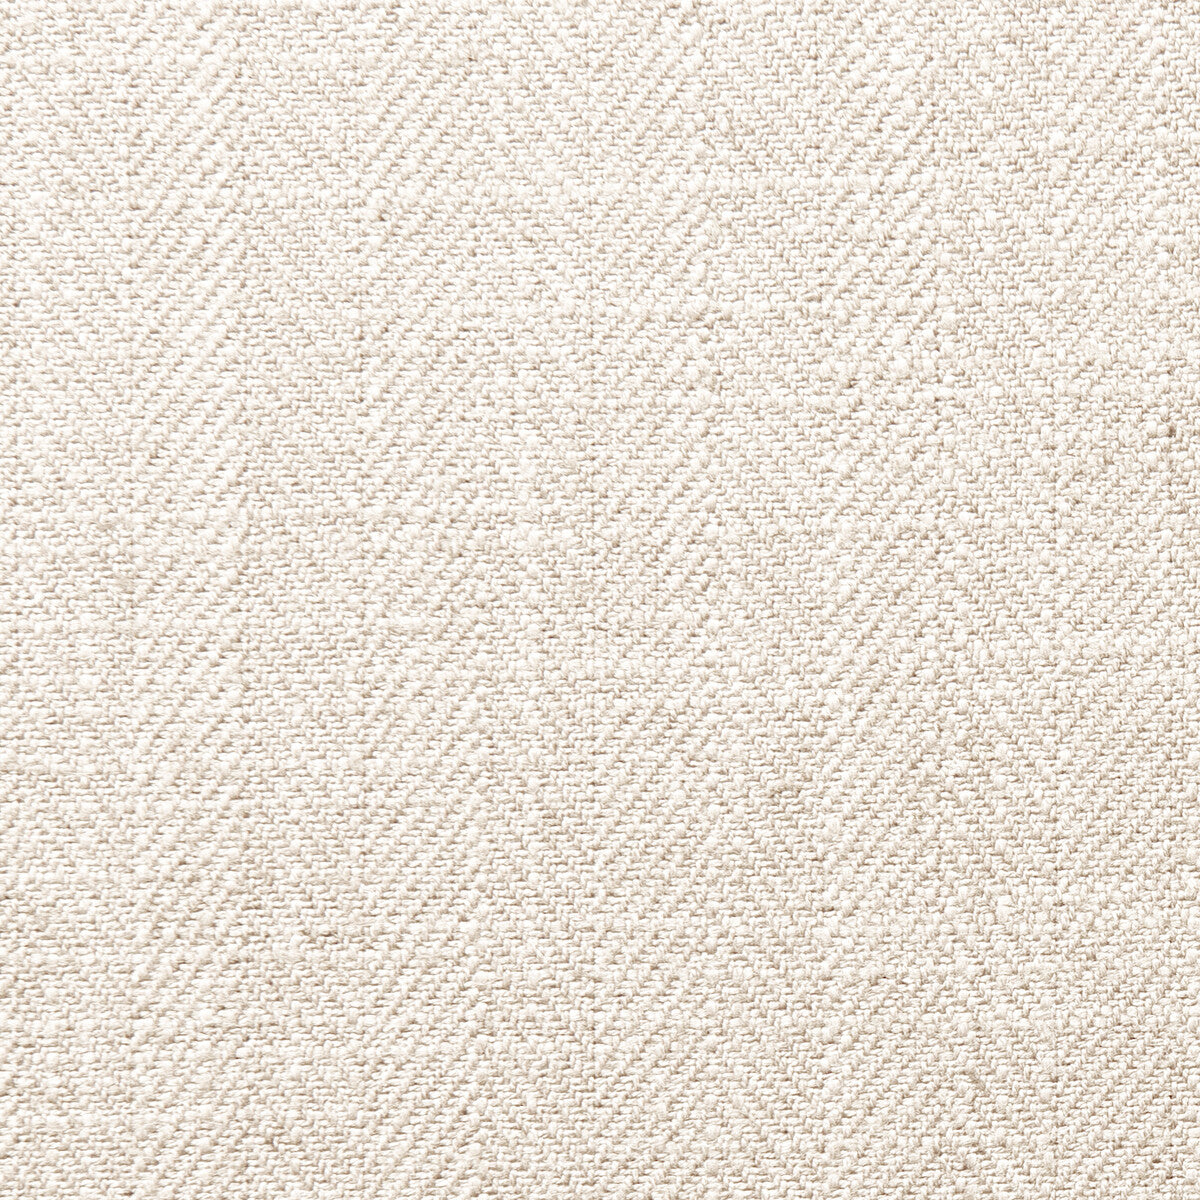 Henley fabric in oatmeal color - pattern F0648/24.CAC.0 - by Clarke And Clarke in the Clarke &amp; Clarke Henley collection